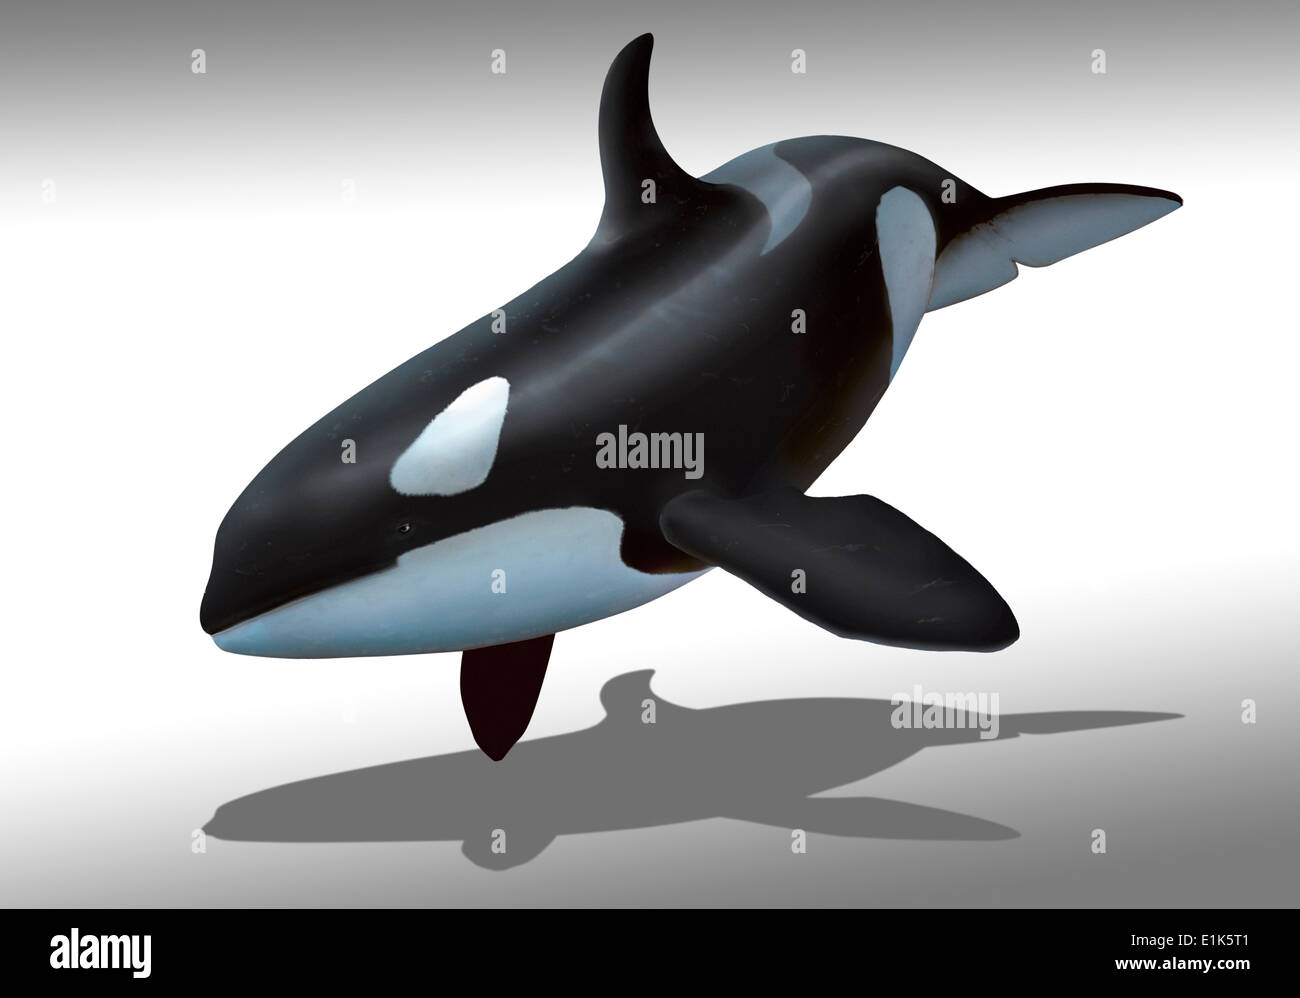 Computer artwork of a female killer whale or orca (Orcinus orca) Orcas are large predatory dolphins that are found all over the Stock Photo